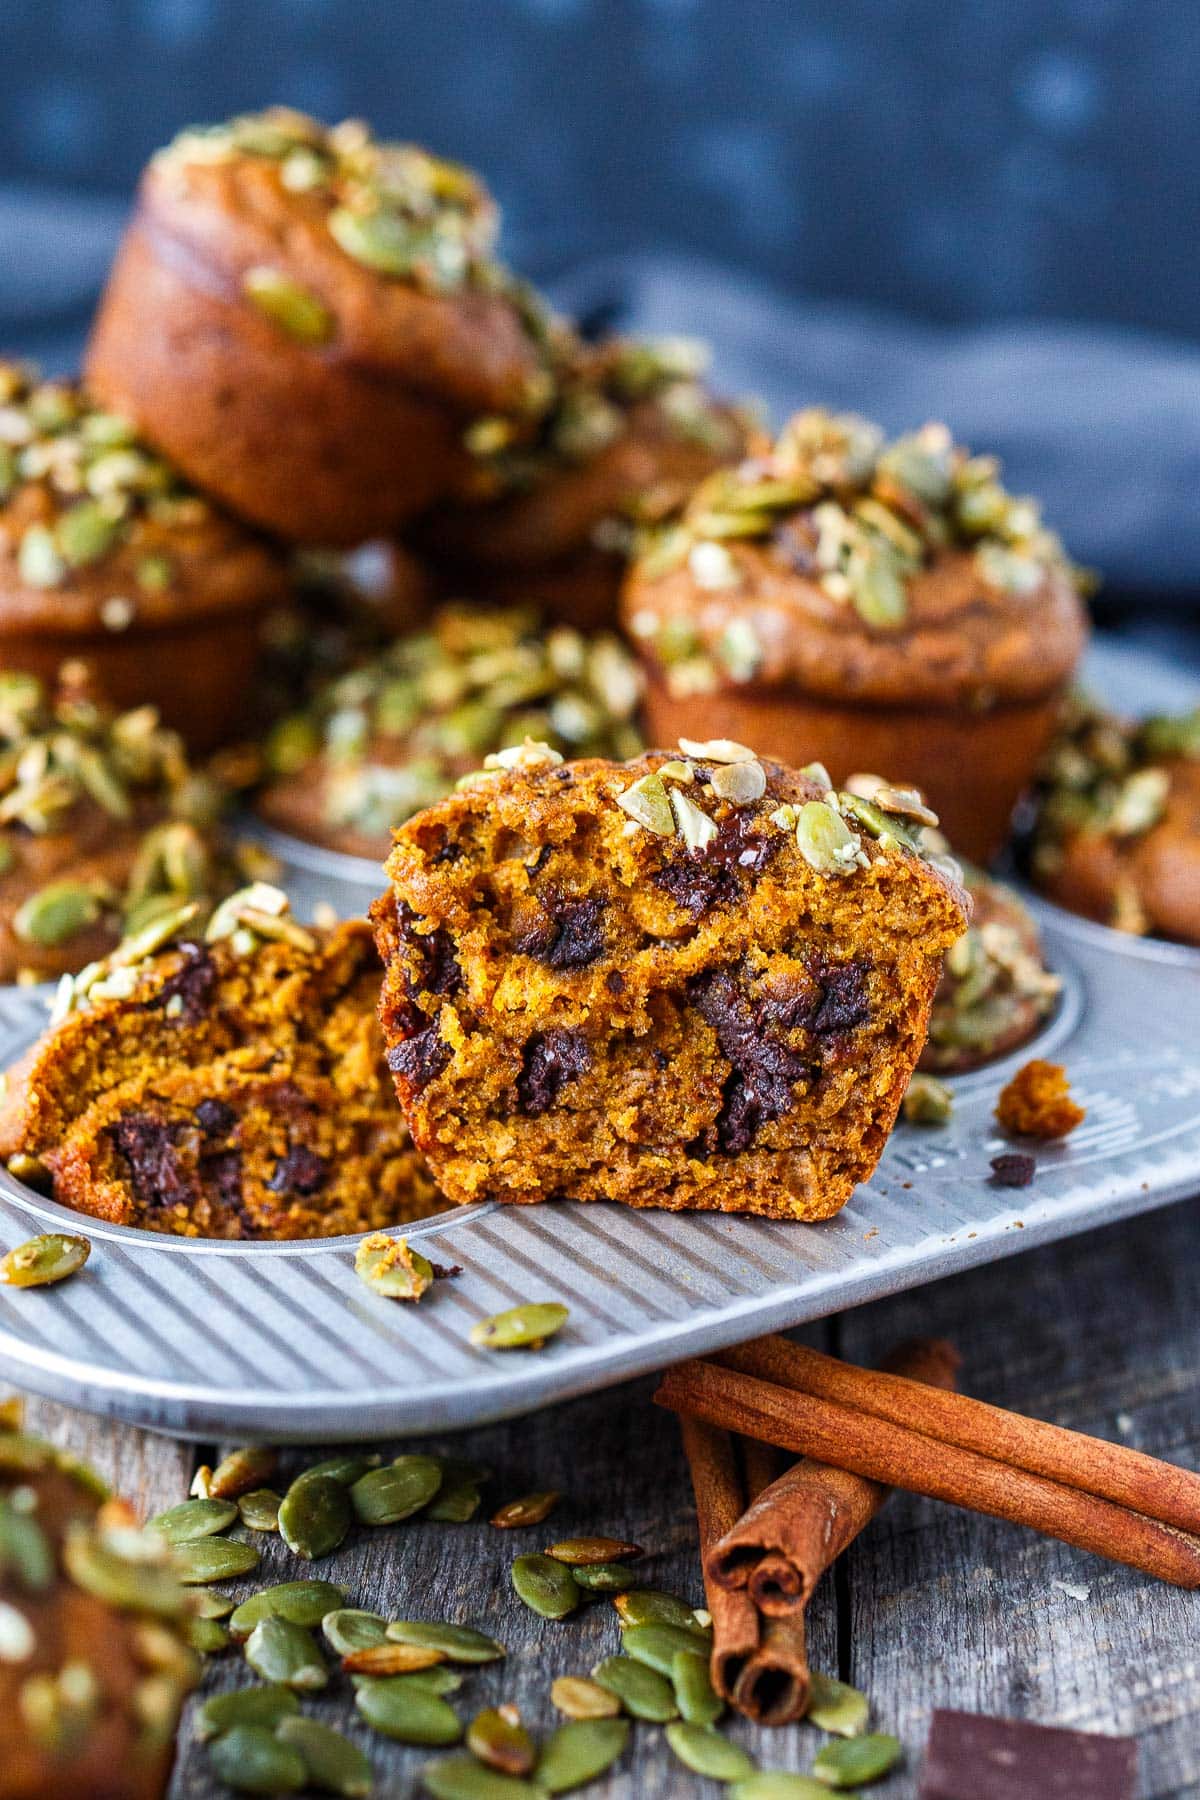 These irresistible Pumpkin Muffins with chocolate chips are velvety and moist, with just the right amount of sweet and spice. They can be easily customized and are packed with nutritional benefits, making them a delightful autumn treat. Vegan-adaptable!